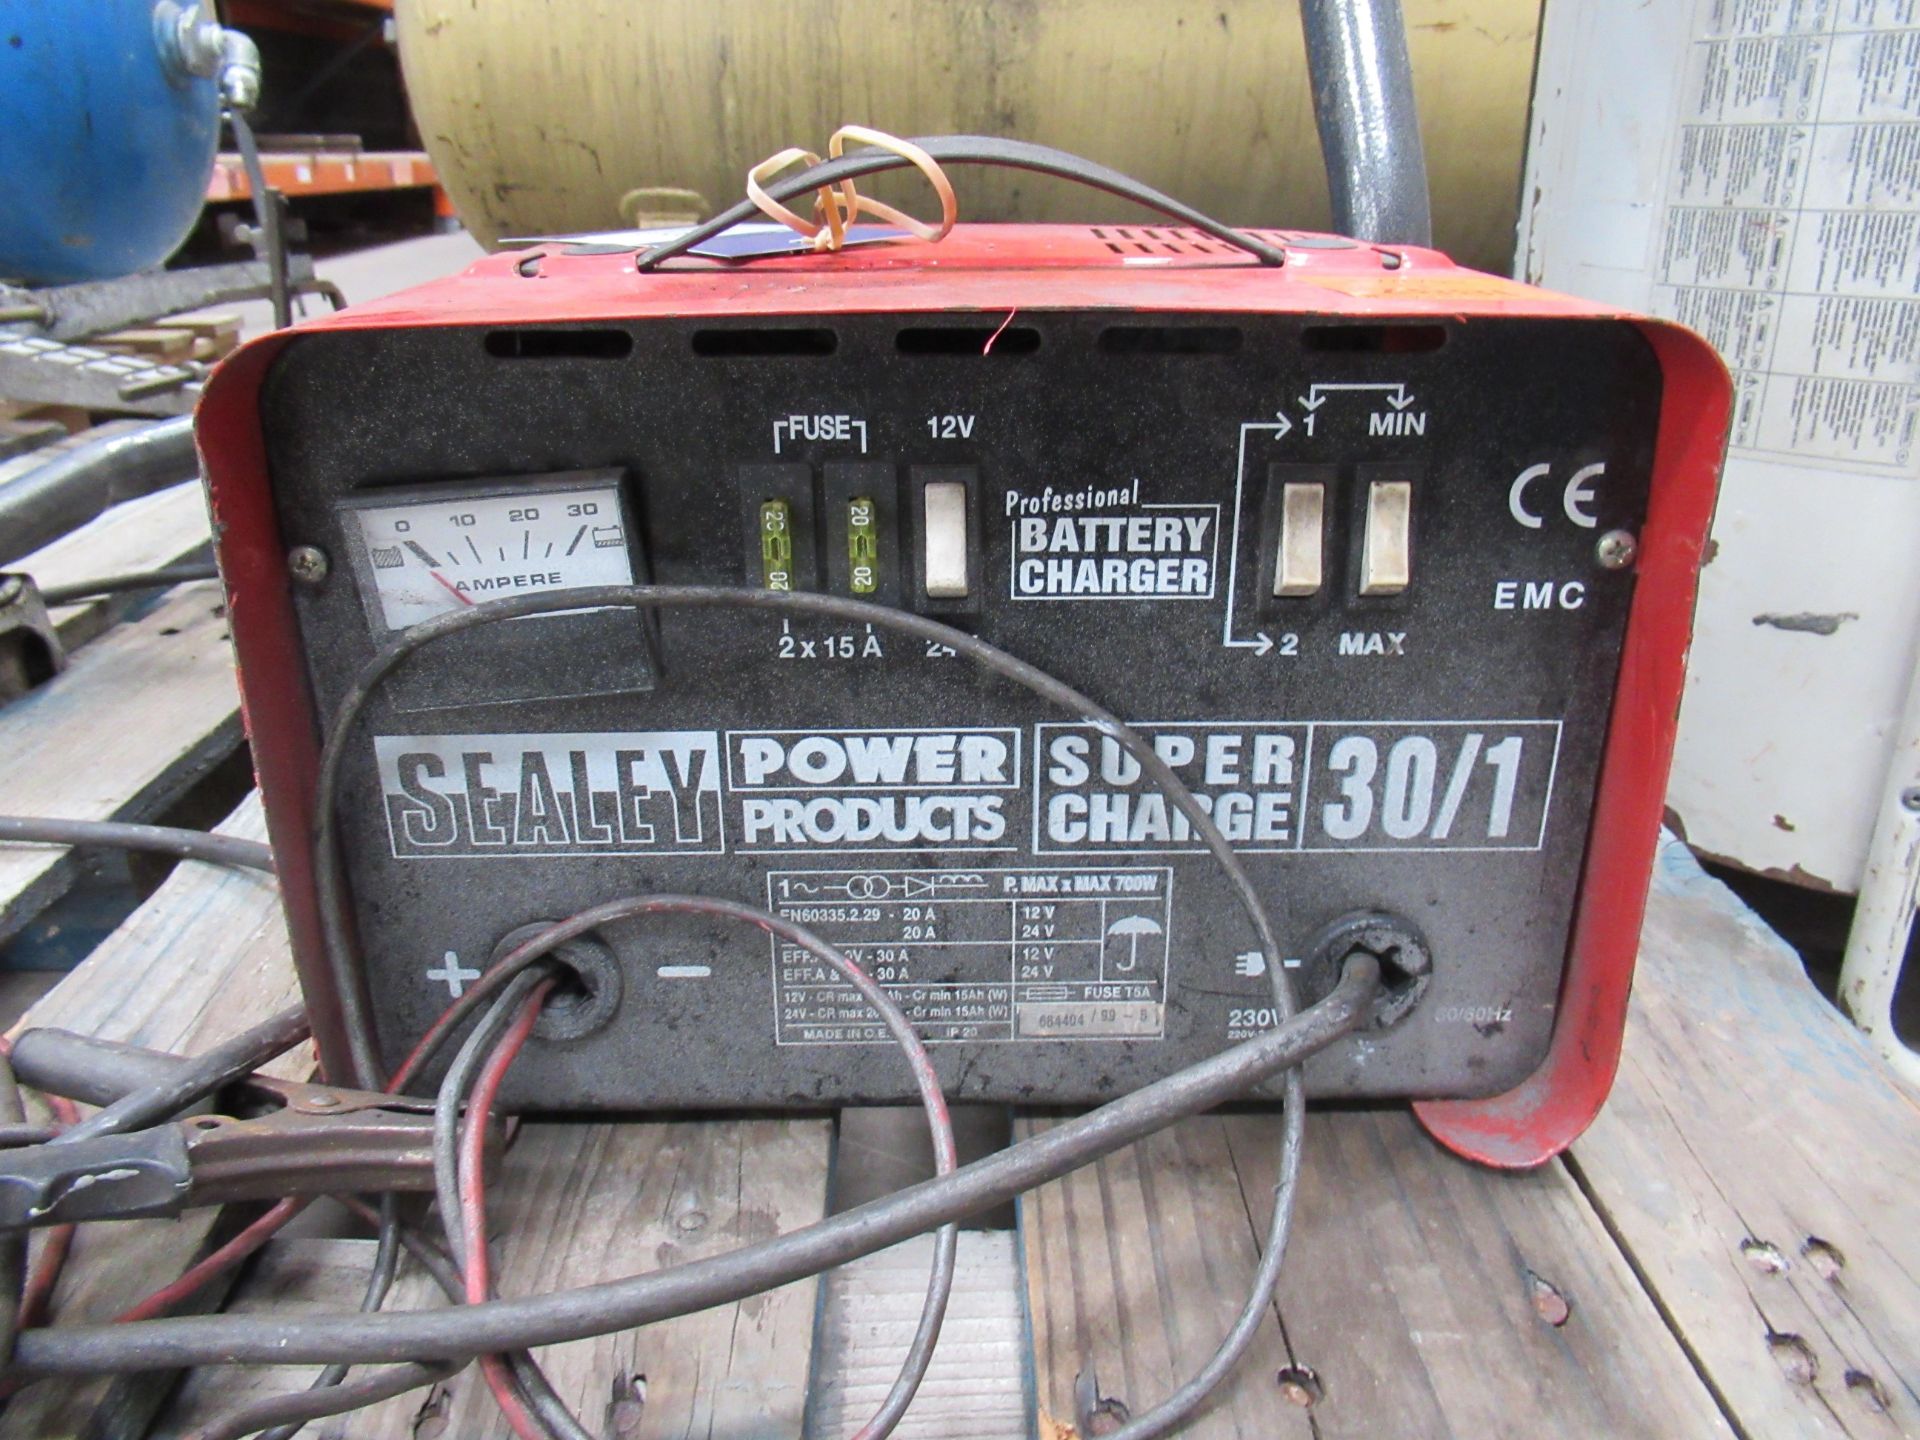 A Sealey super charge 30/1 battery charger